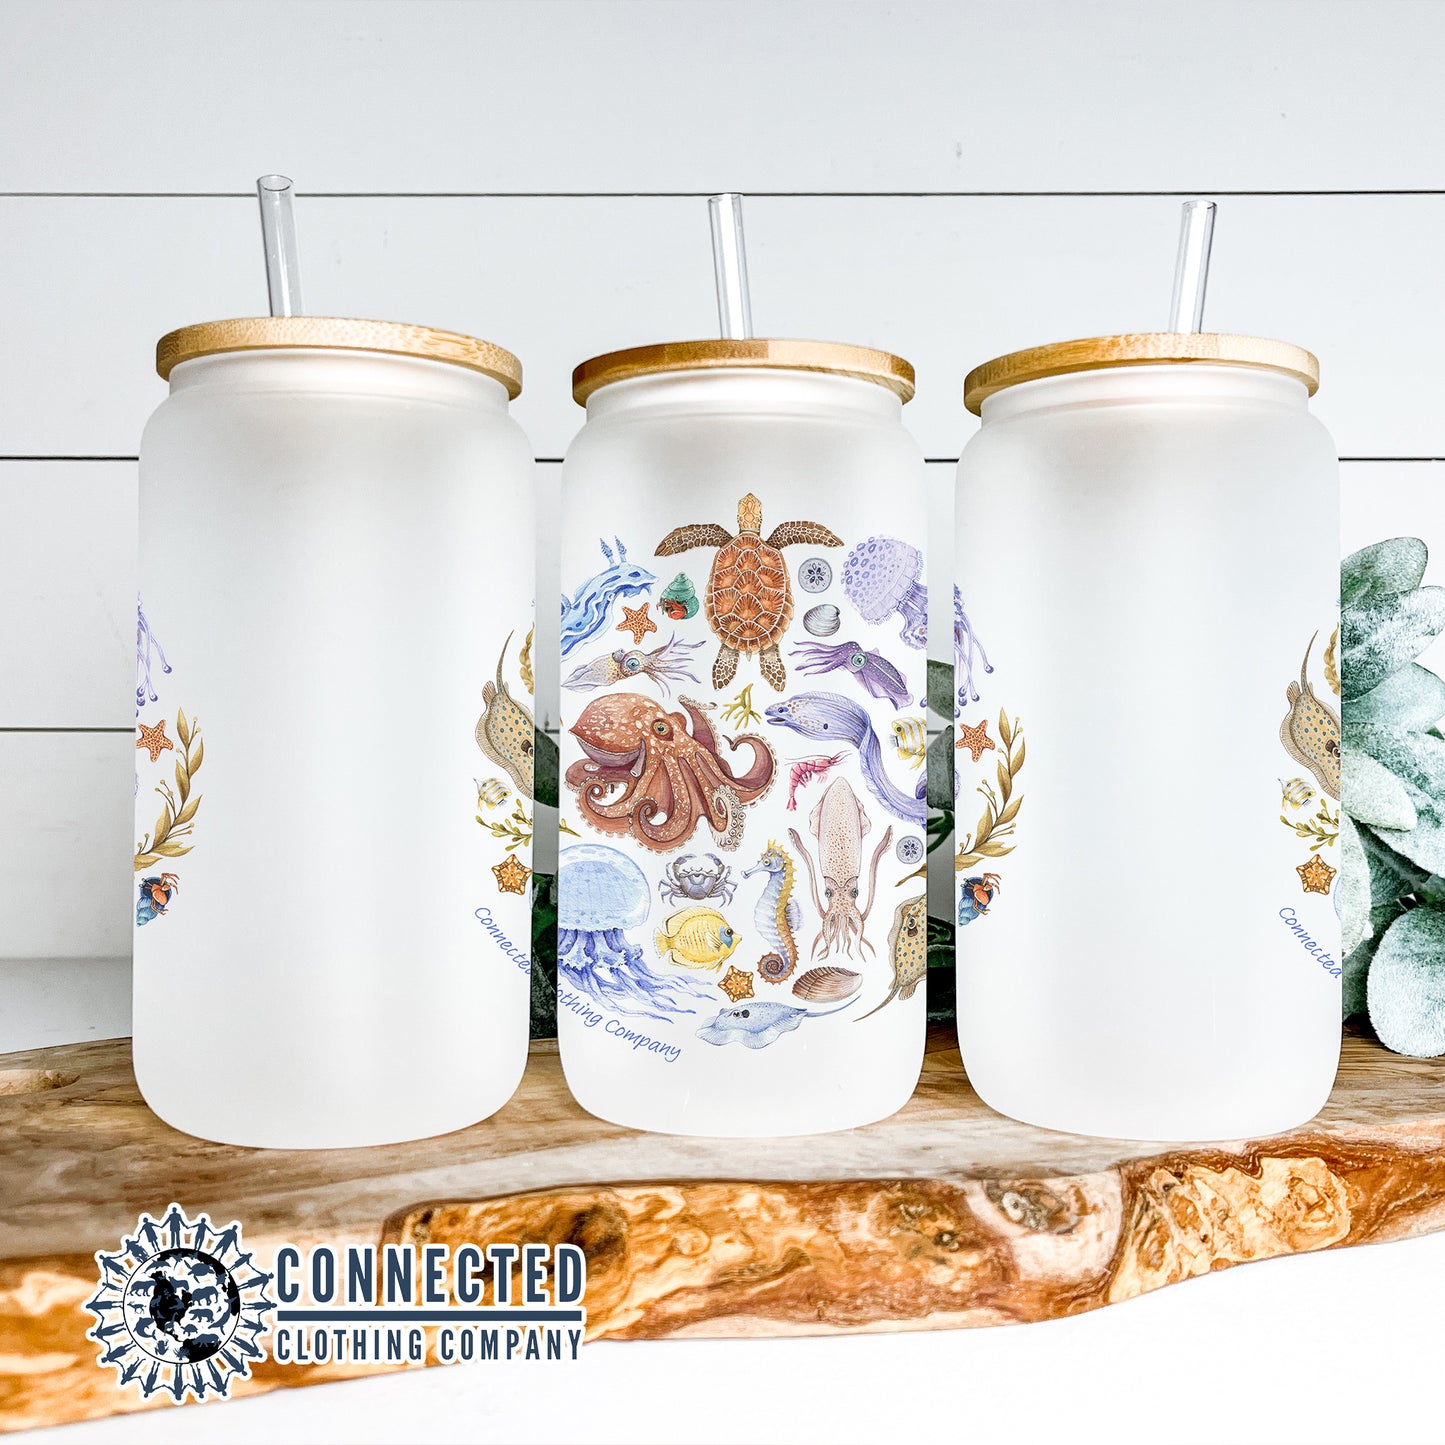 2-Pack Sea Creatures Glass Cans - Connected Clothing Company - 10% of proceeds donated to ocean conservation